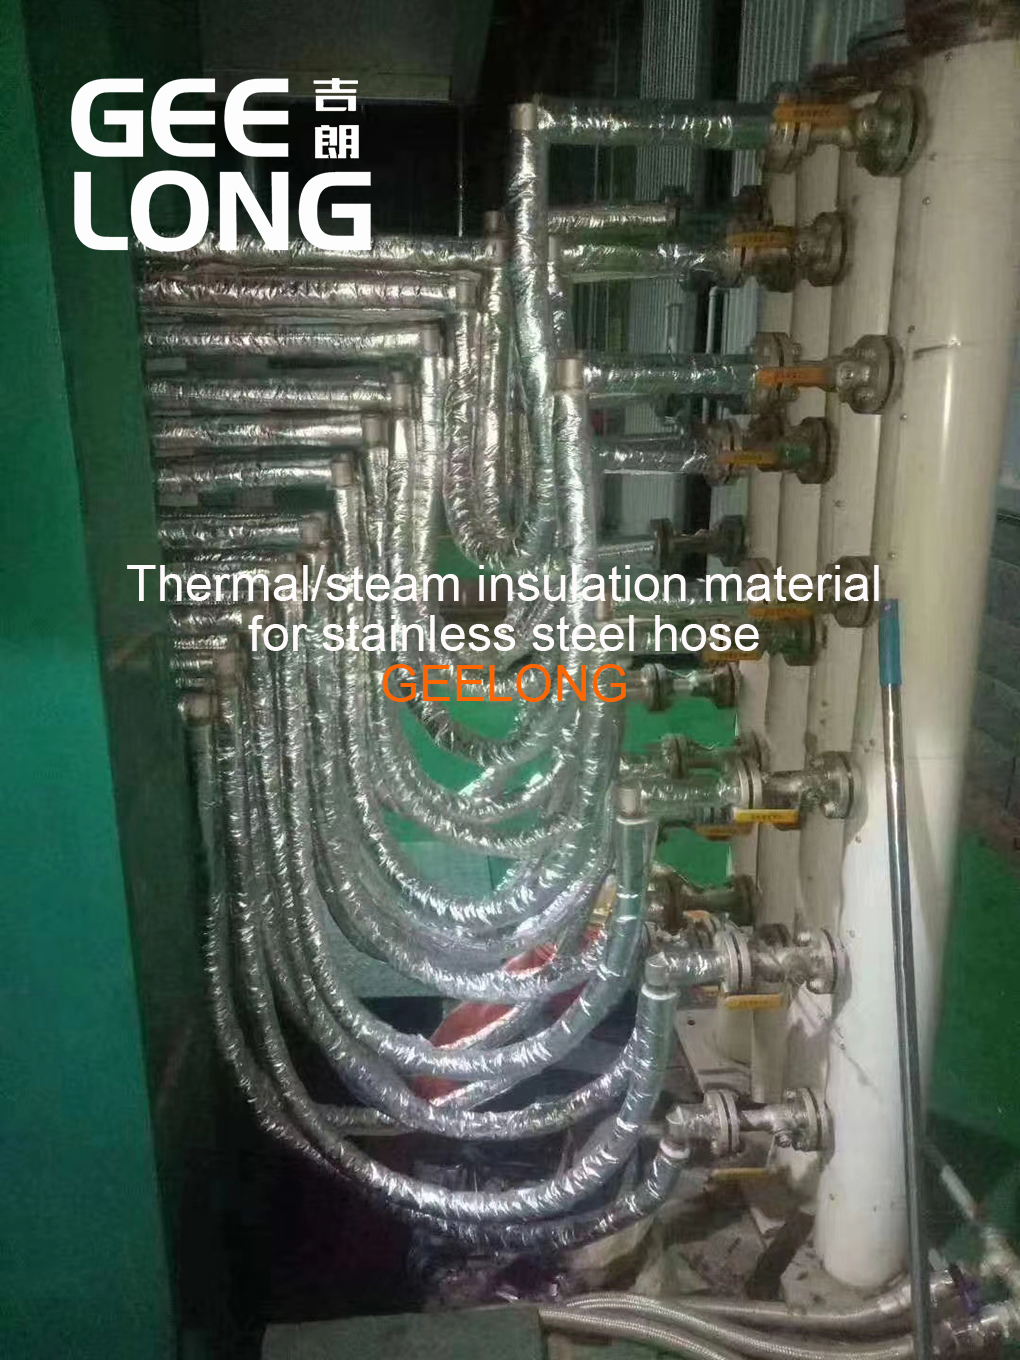 Thermal/steam insulation material for stainless steel hose